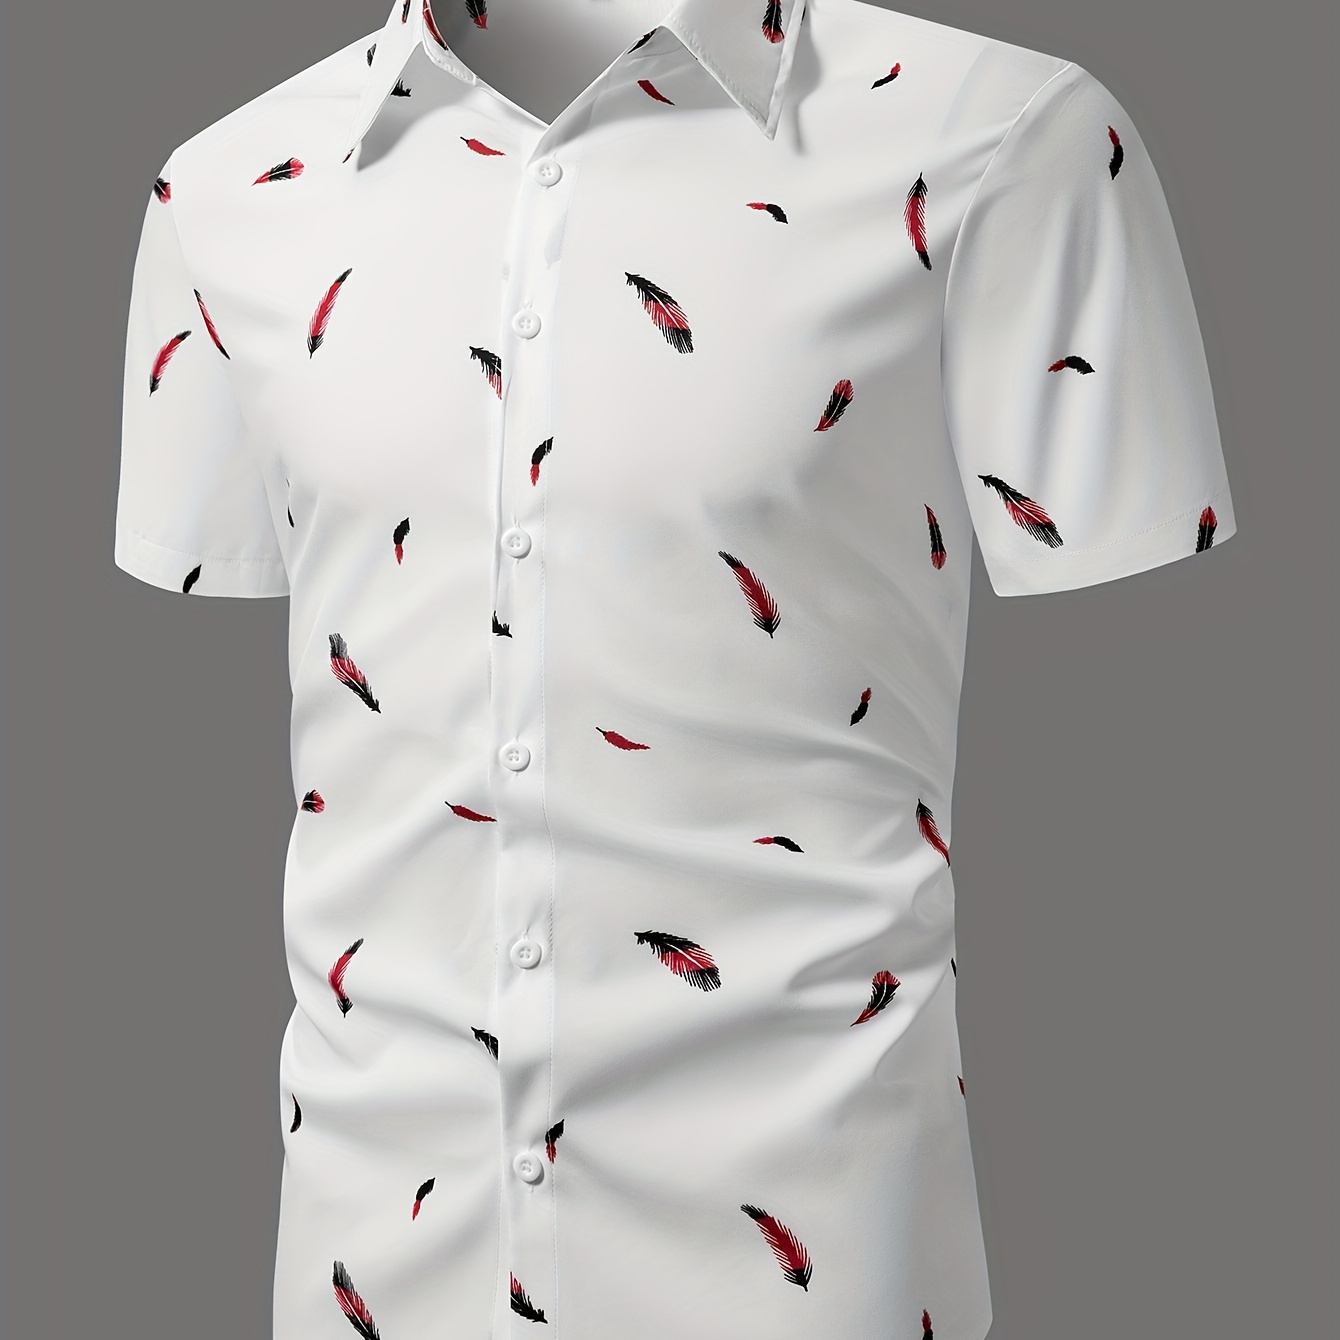 

Feather Print Men's Summer Fashionable And Simple Short Sleeve Button Casual Lapel Simple Shirt, Trendy And Versatile, Suitable For Dates, Beach Holiday, As Gifts